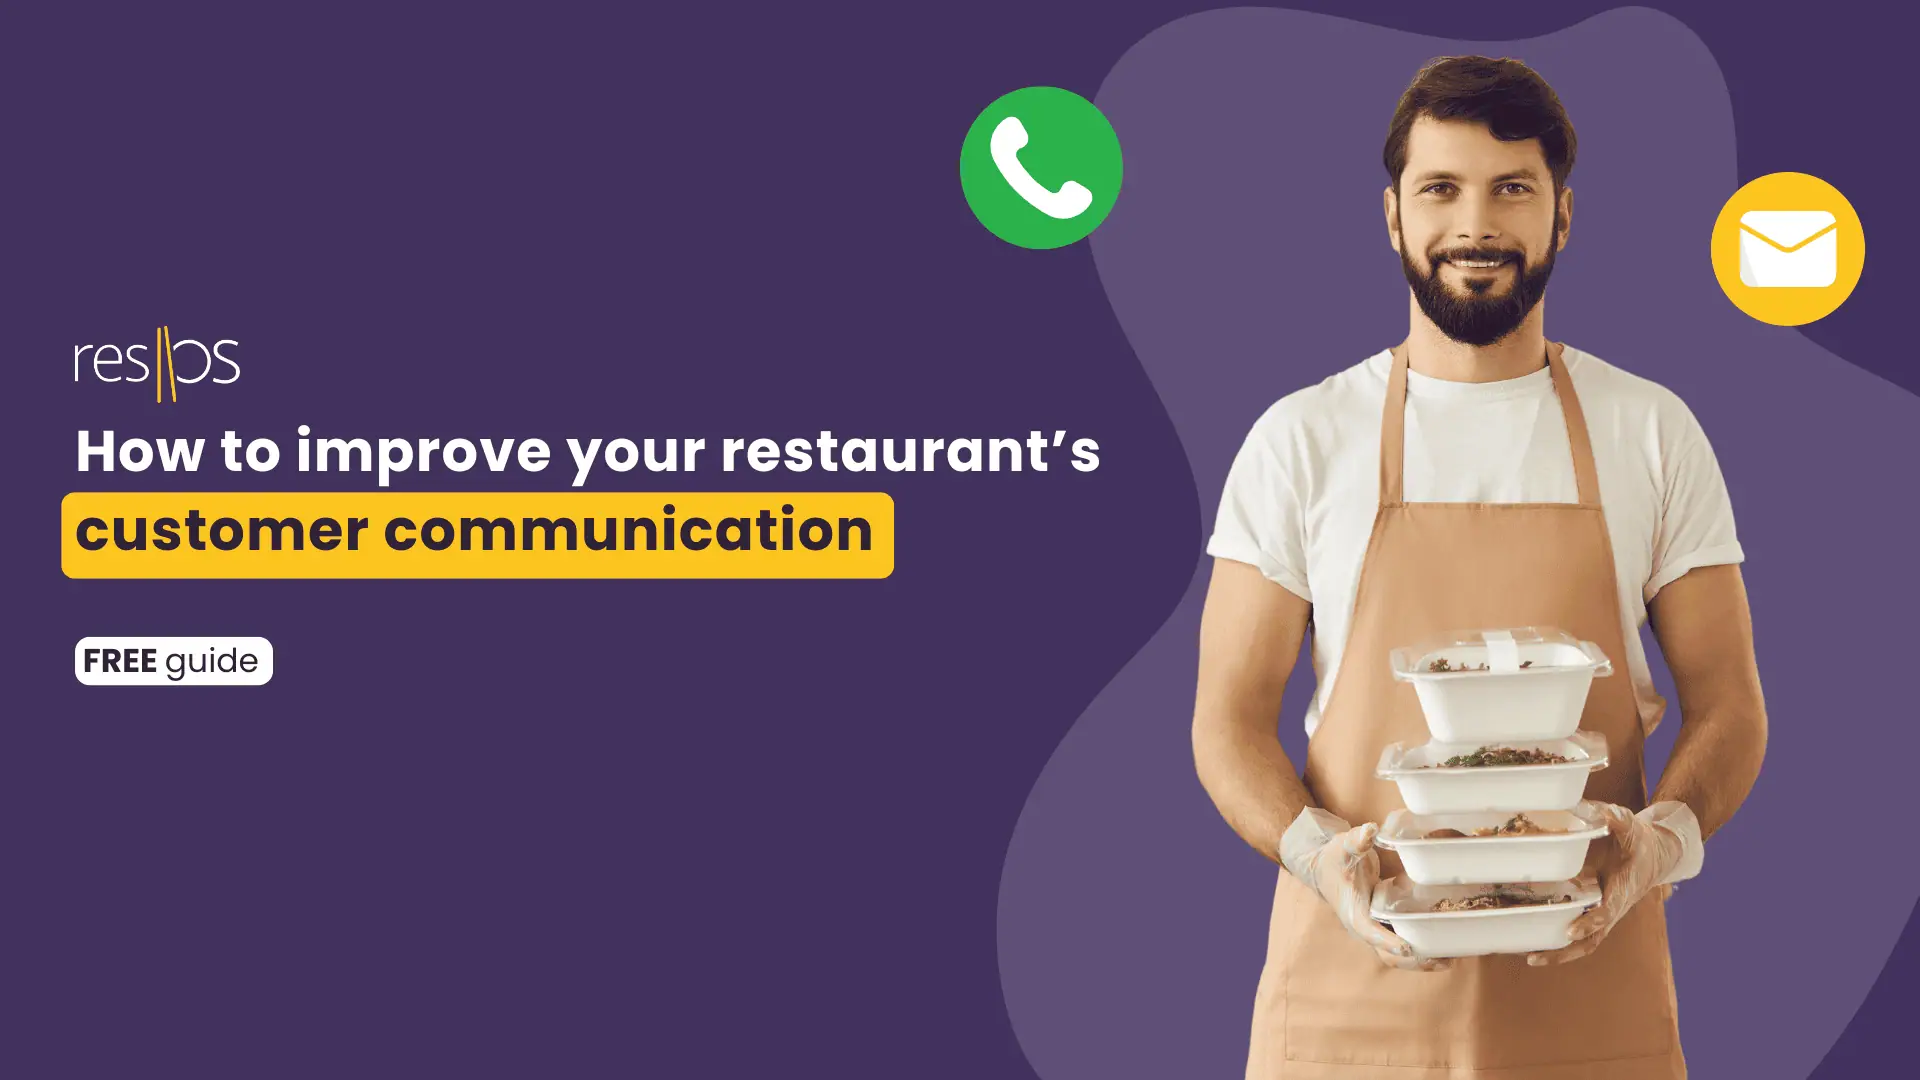 How to improve your restaurant’s customer communication